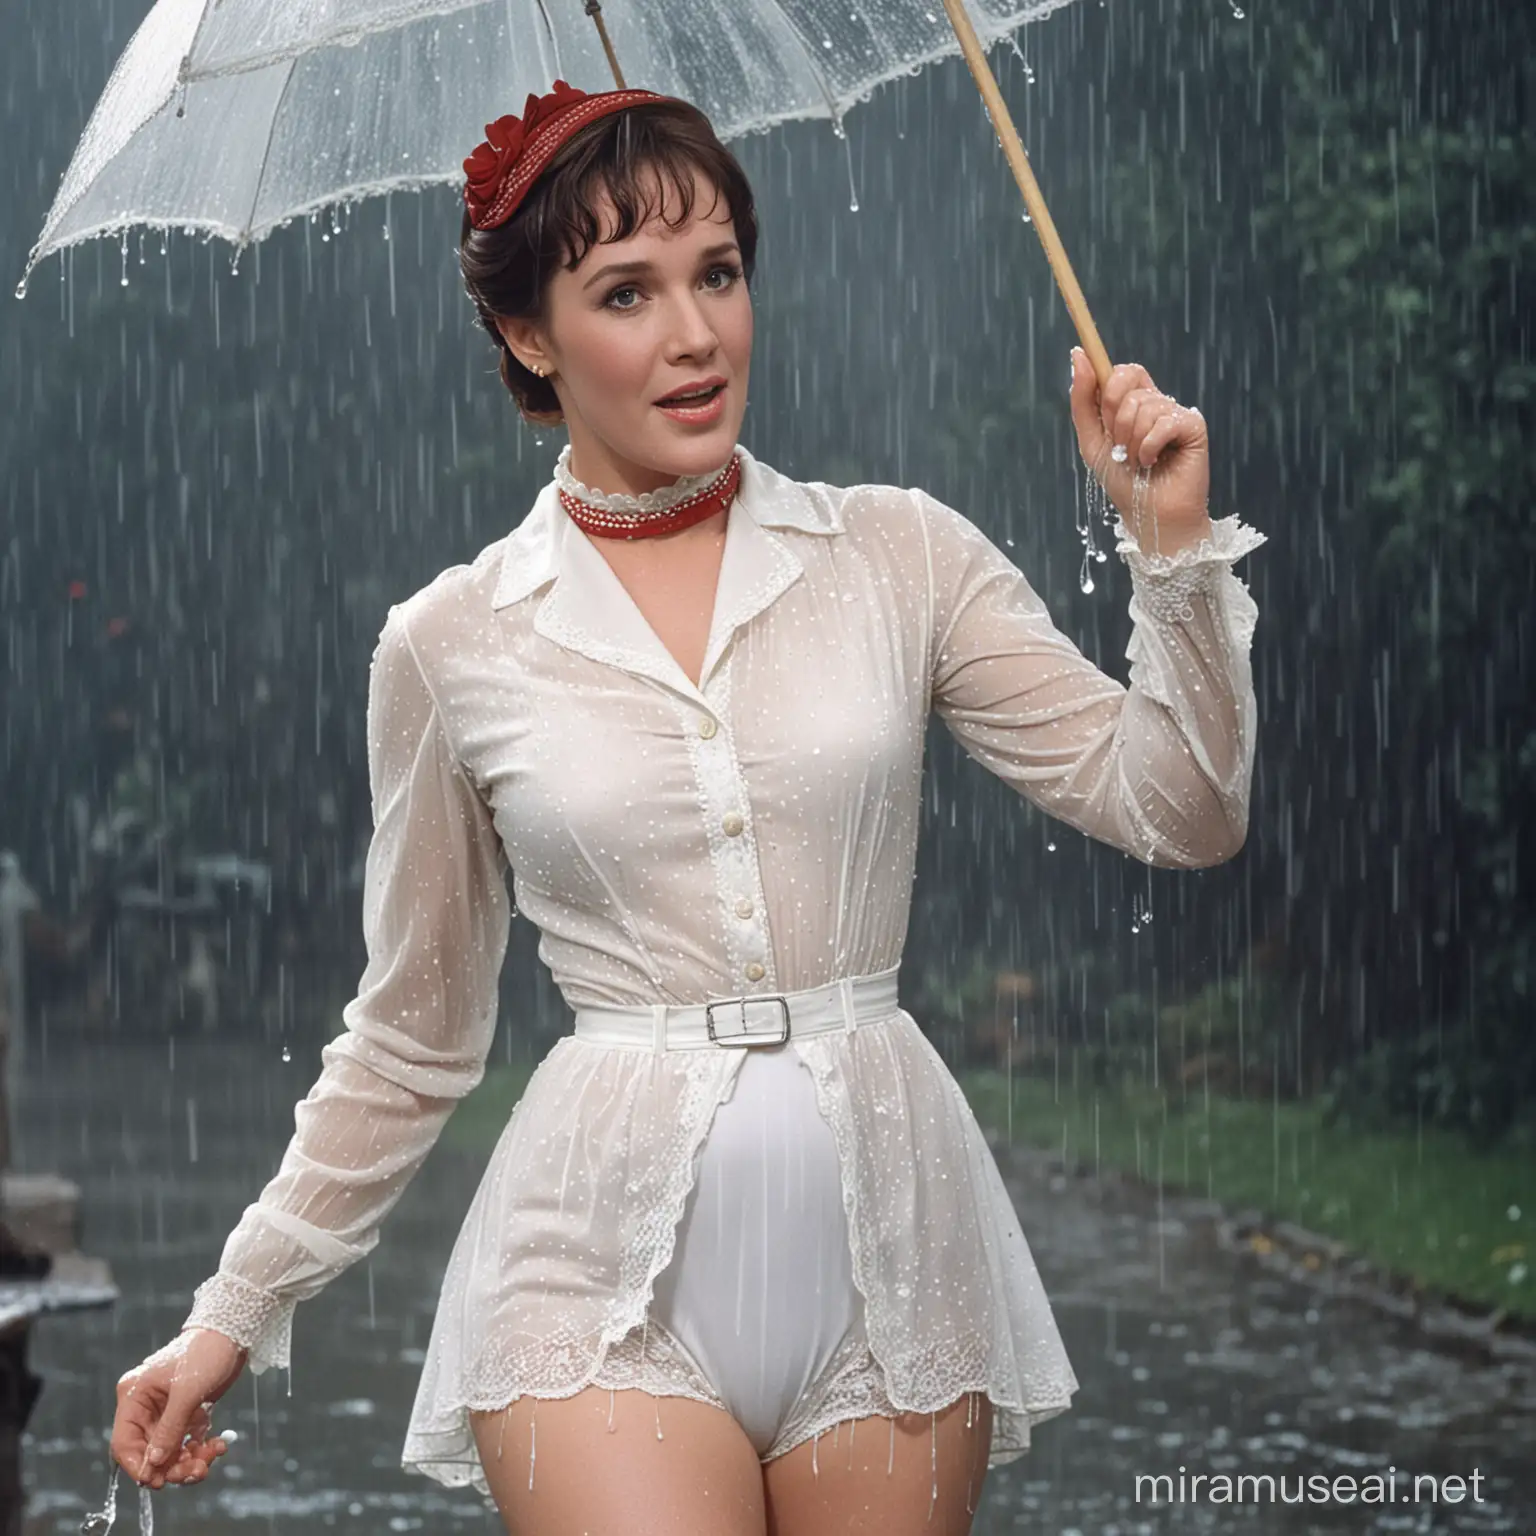 A colour photo of Julie Andrews as Mary Poppins, wearing wet, white lacy panties, in the rain.